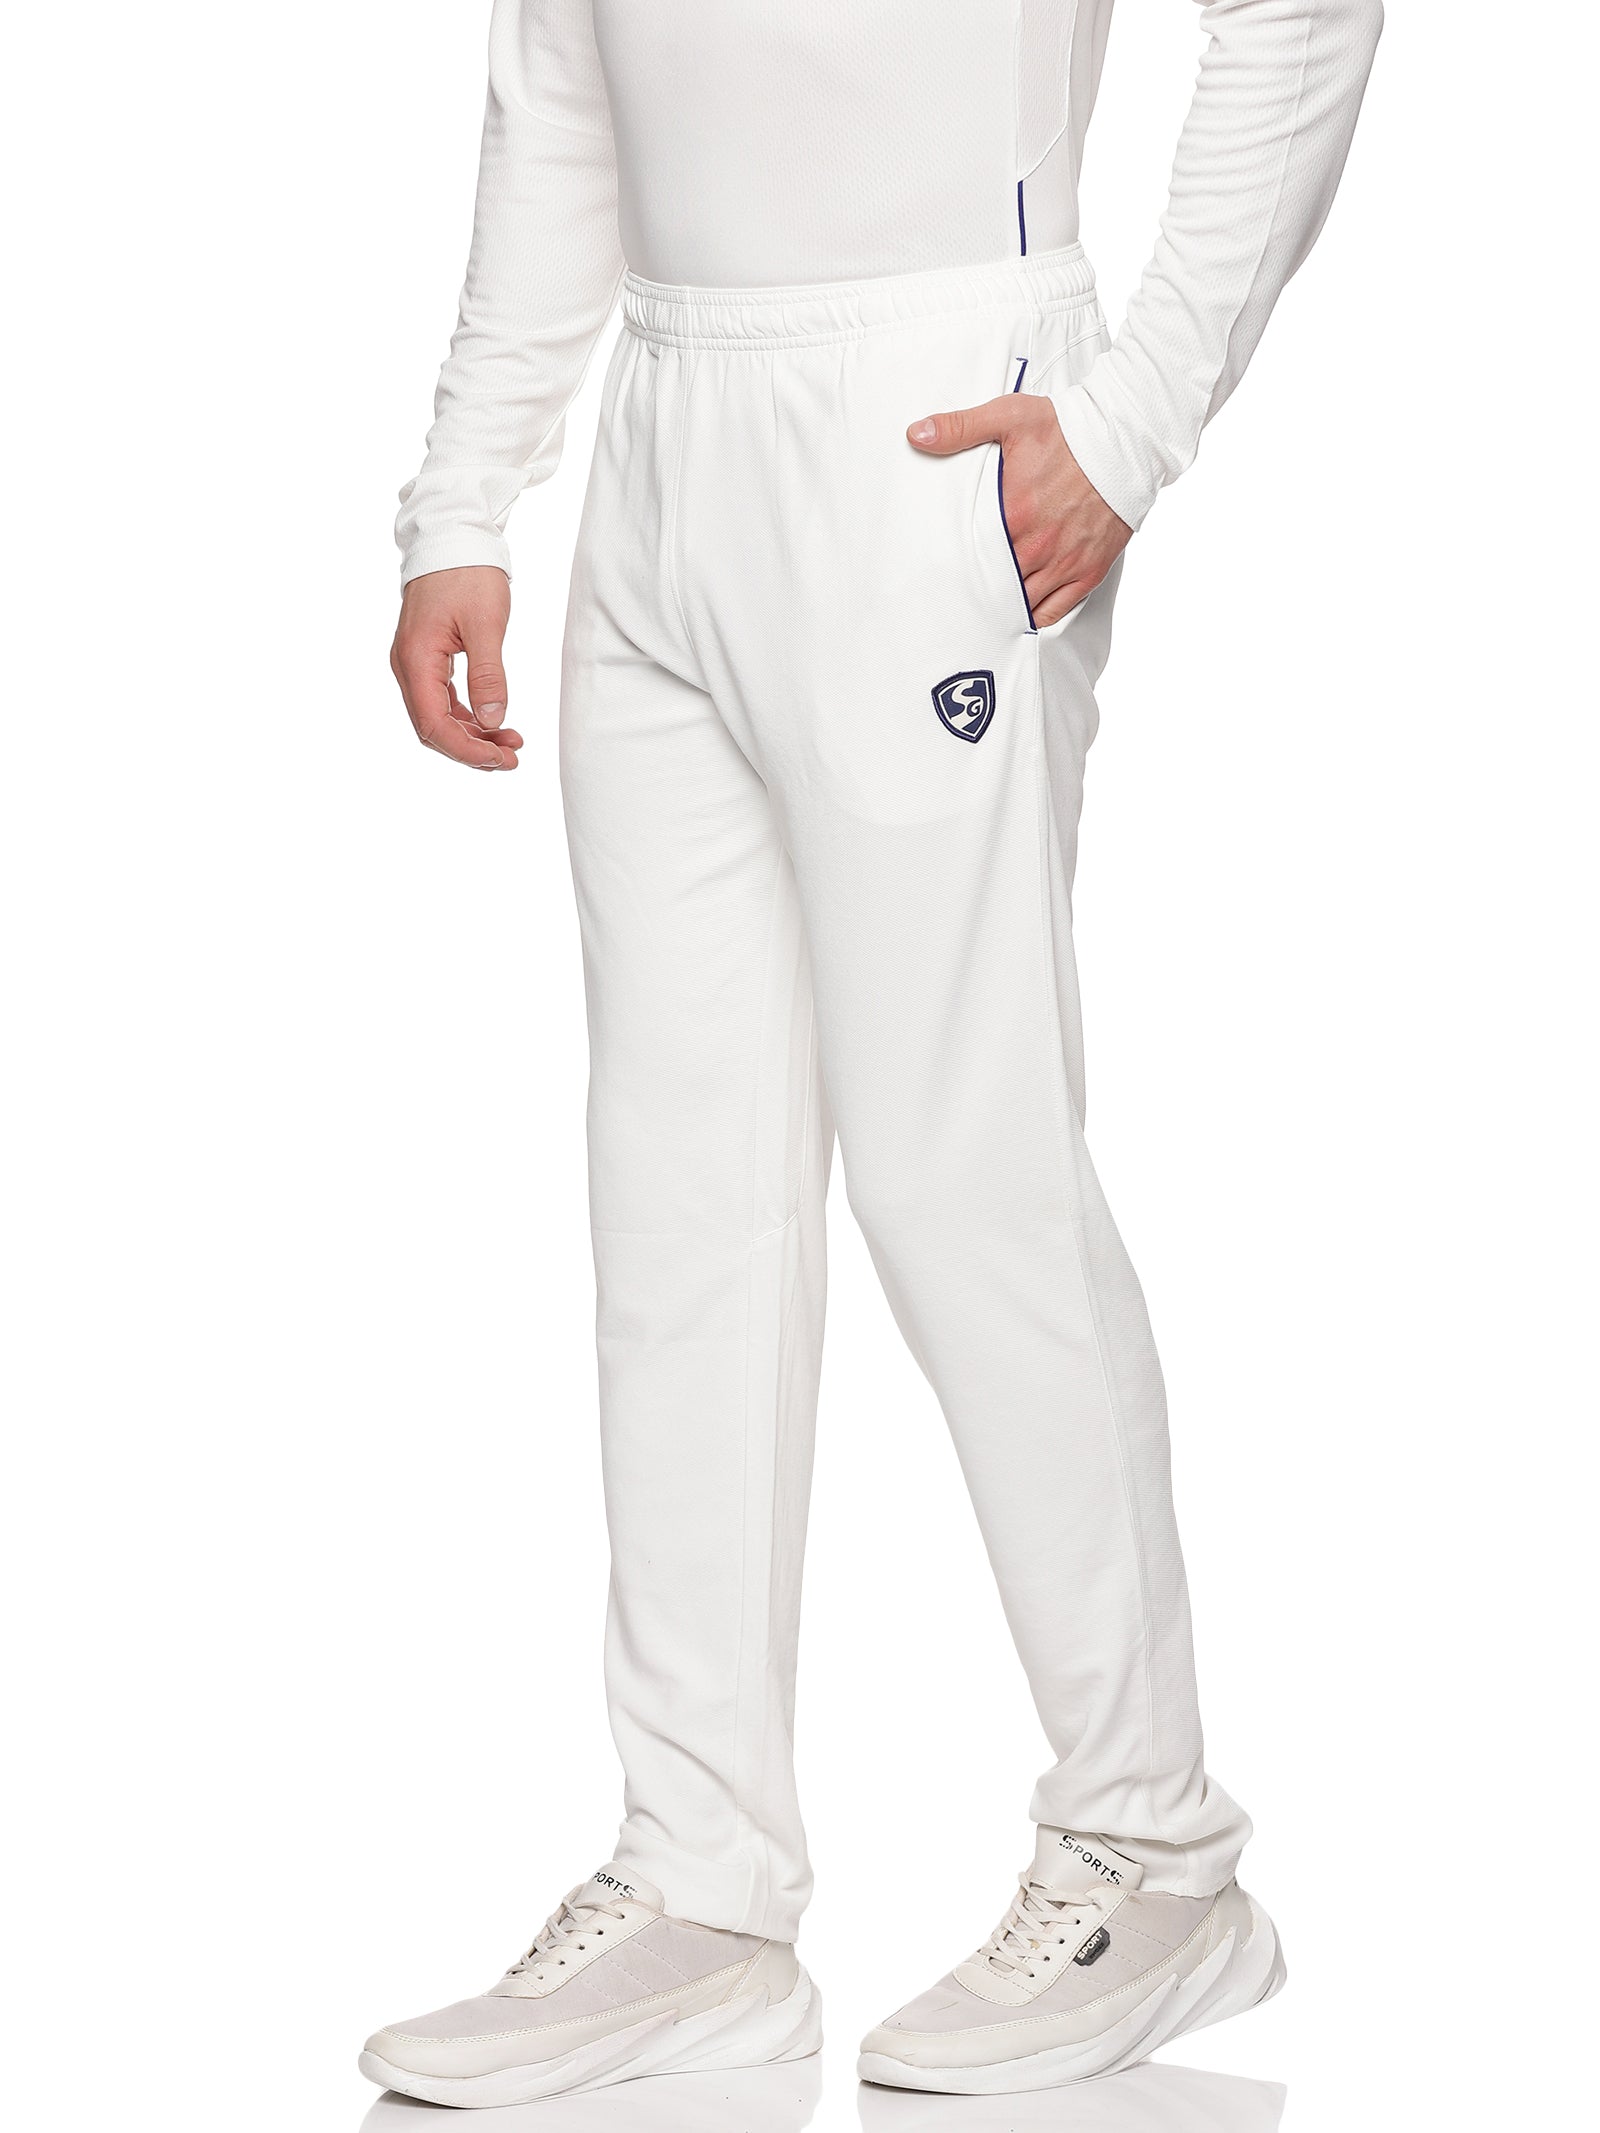 Buy Spartan 100% Polyester Cricket Dress for Men (White) (Medium) Online at  Low Prices in India - Amazon.in